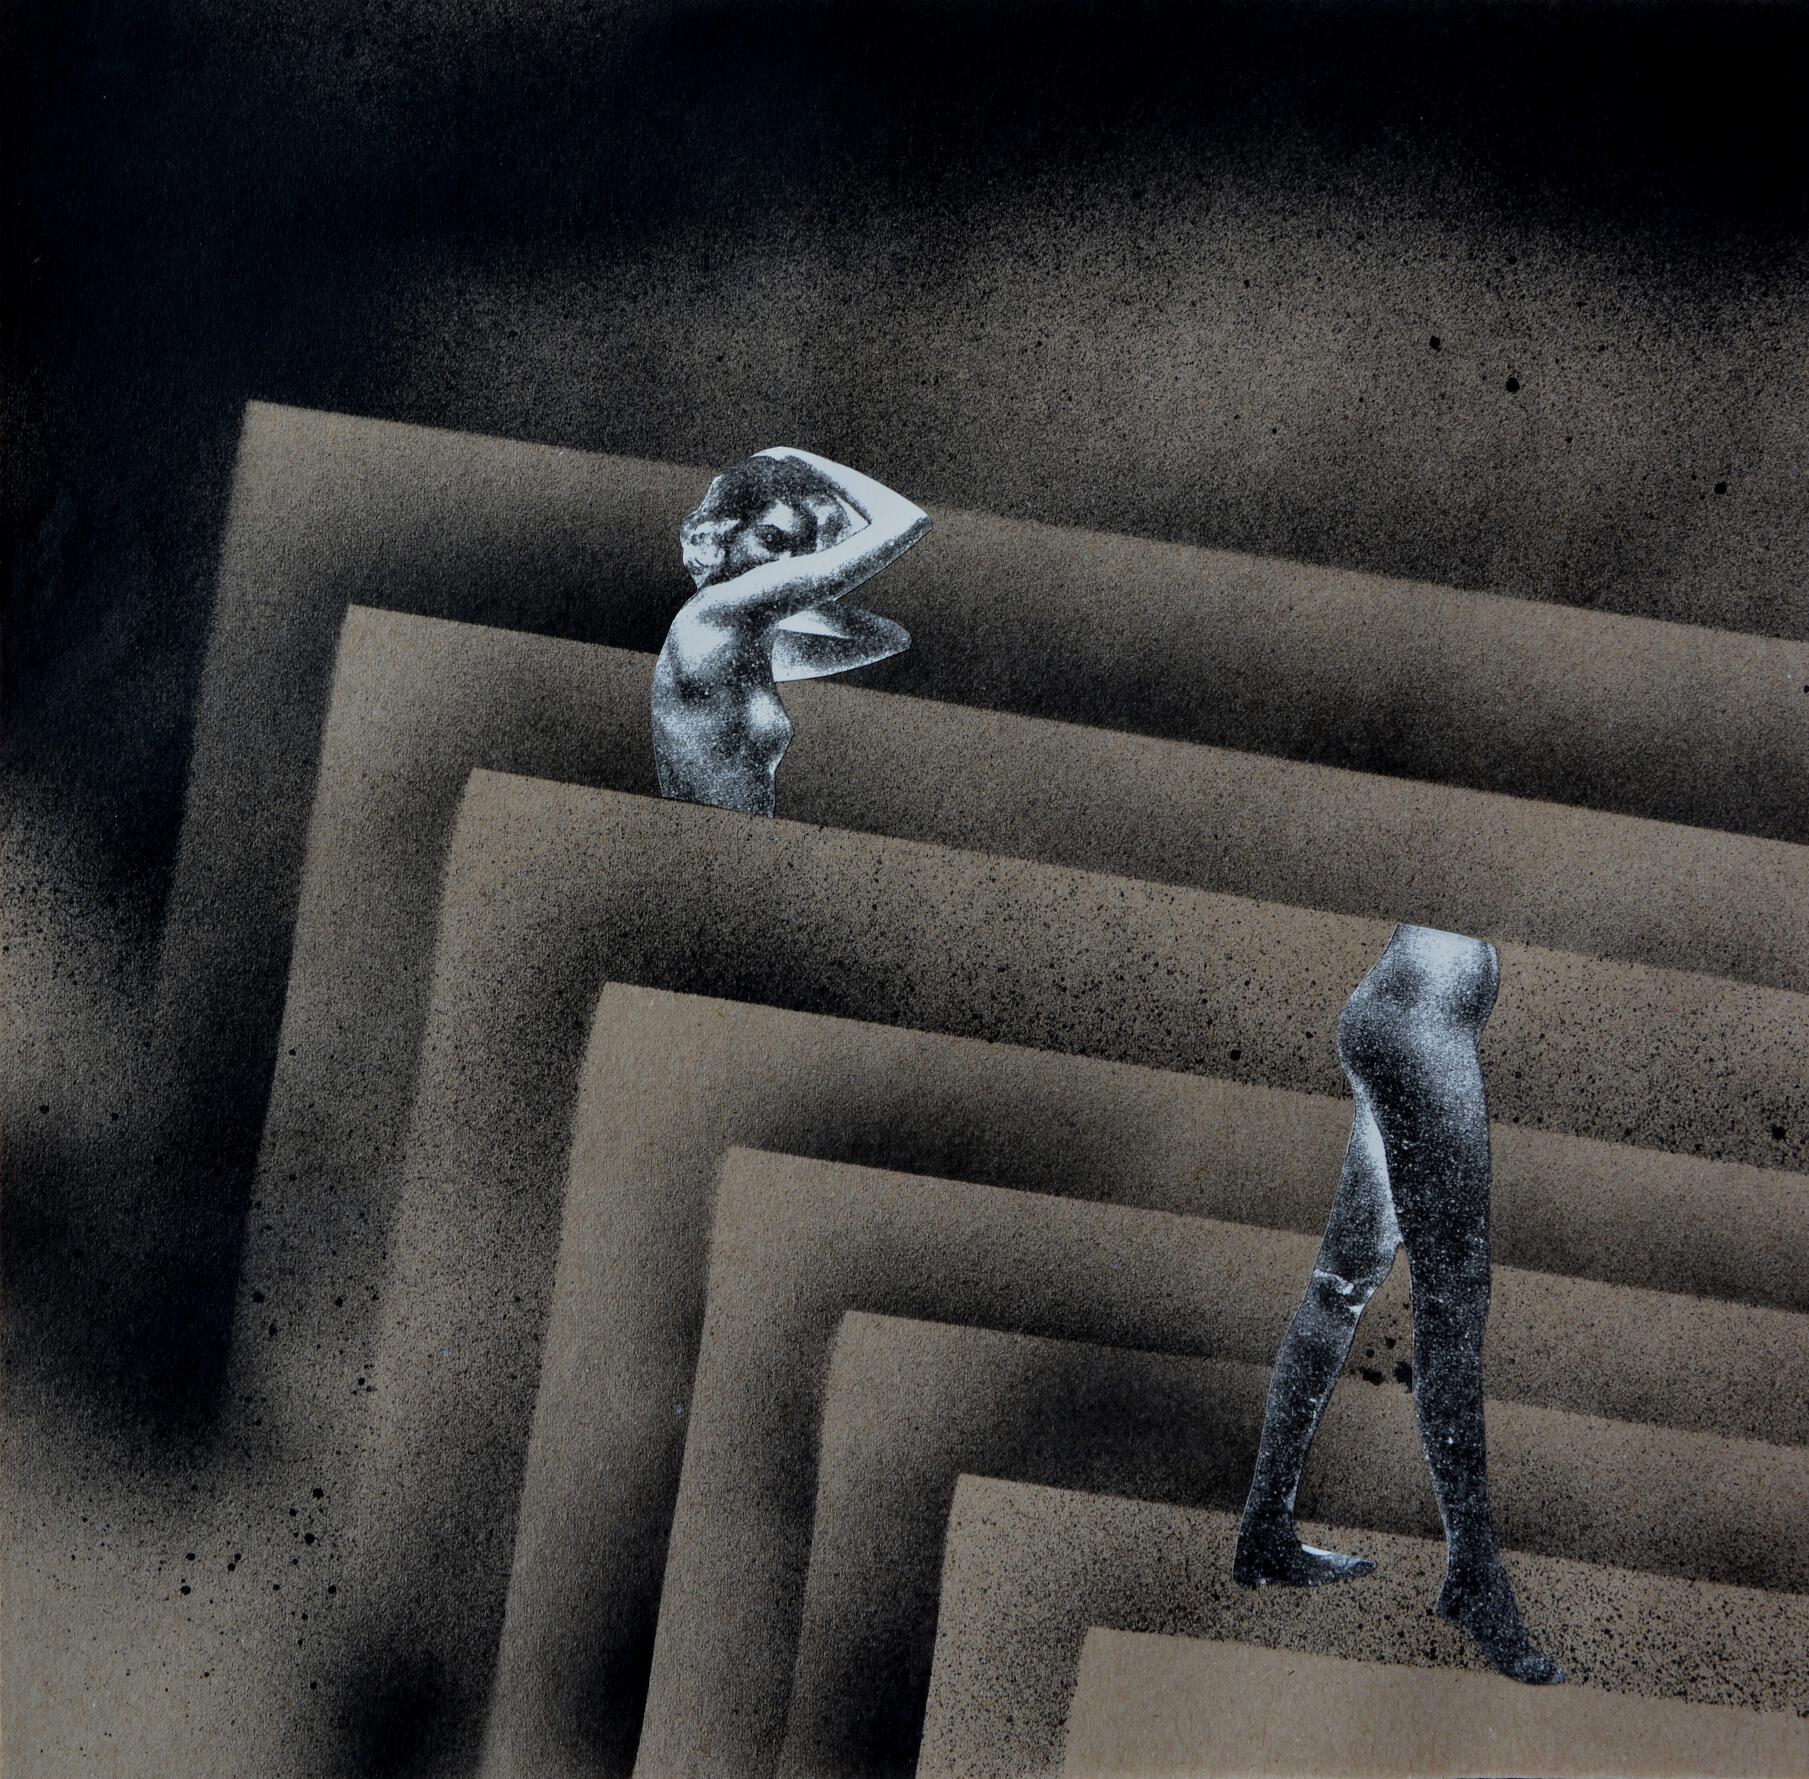 Stairs, collage, pattern, 29,5cm x 30cm, 2013